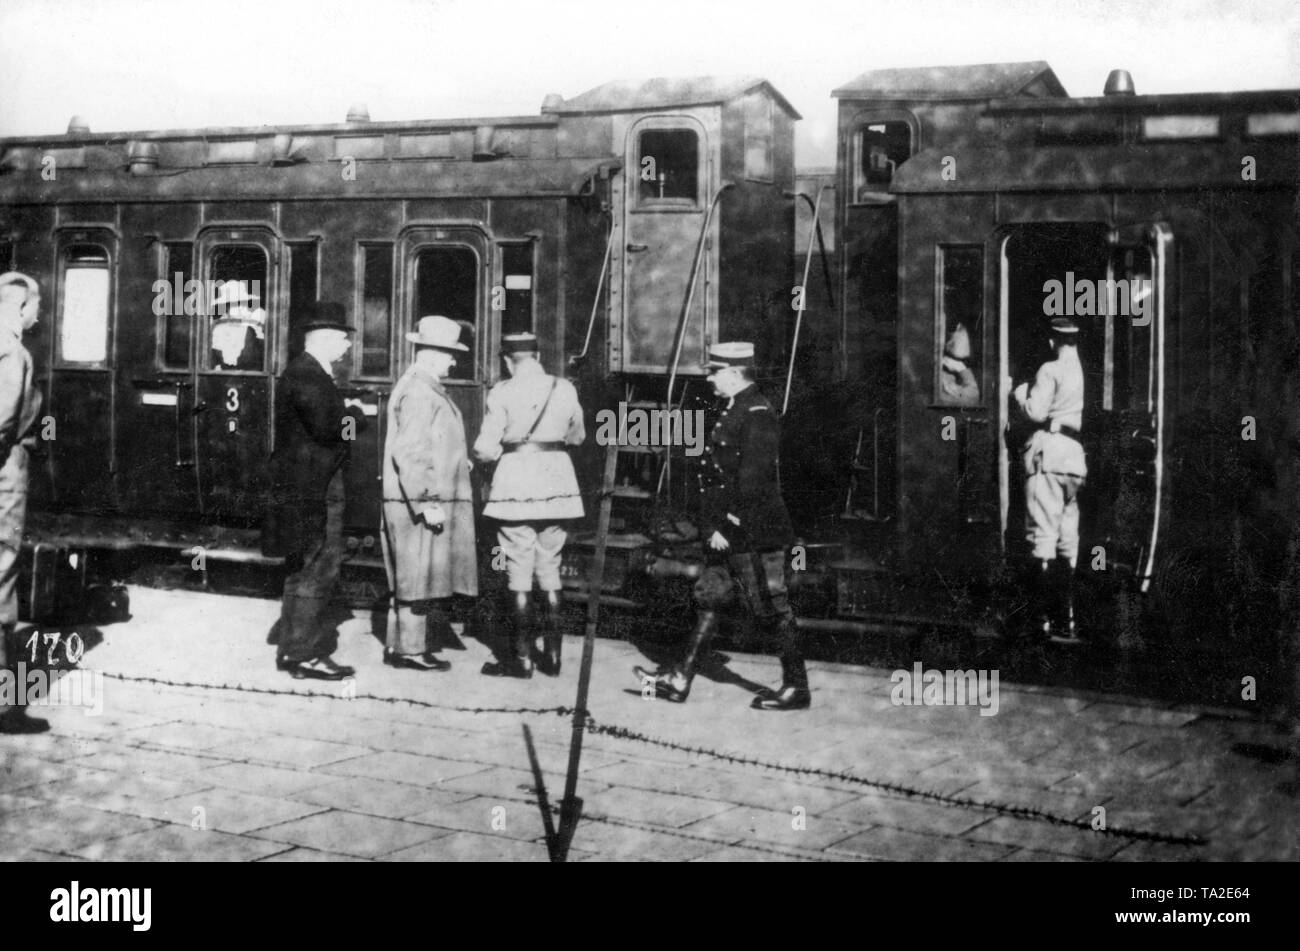 French gendarmes control the travelers at the station of Vohwinkel. Officers of the French army pay attention to the proper conduct of the inspection. In the foreground the platform was secured with barbed wire in order to prevent passengers from getting in the train uncontrolled. Stock Photo